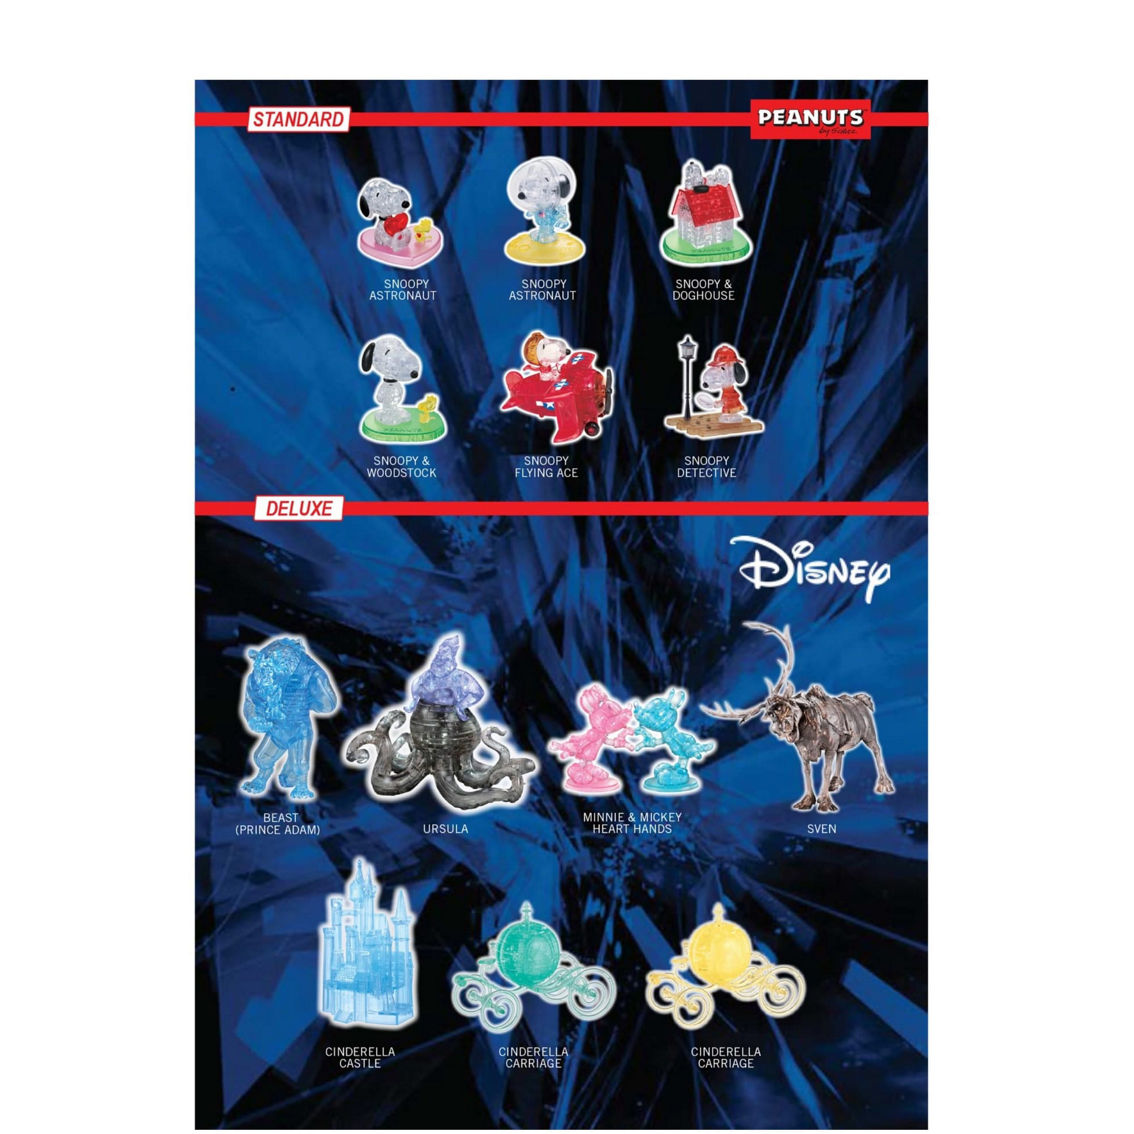 BePuzzled 3D Crystal Puzzle Disney Winnie the Pooh and Piglet (Multi-color): 57 Pcs - Image 4 of 5